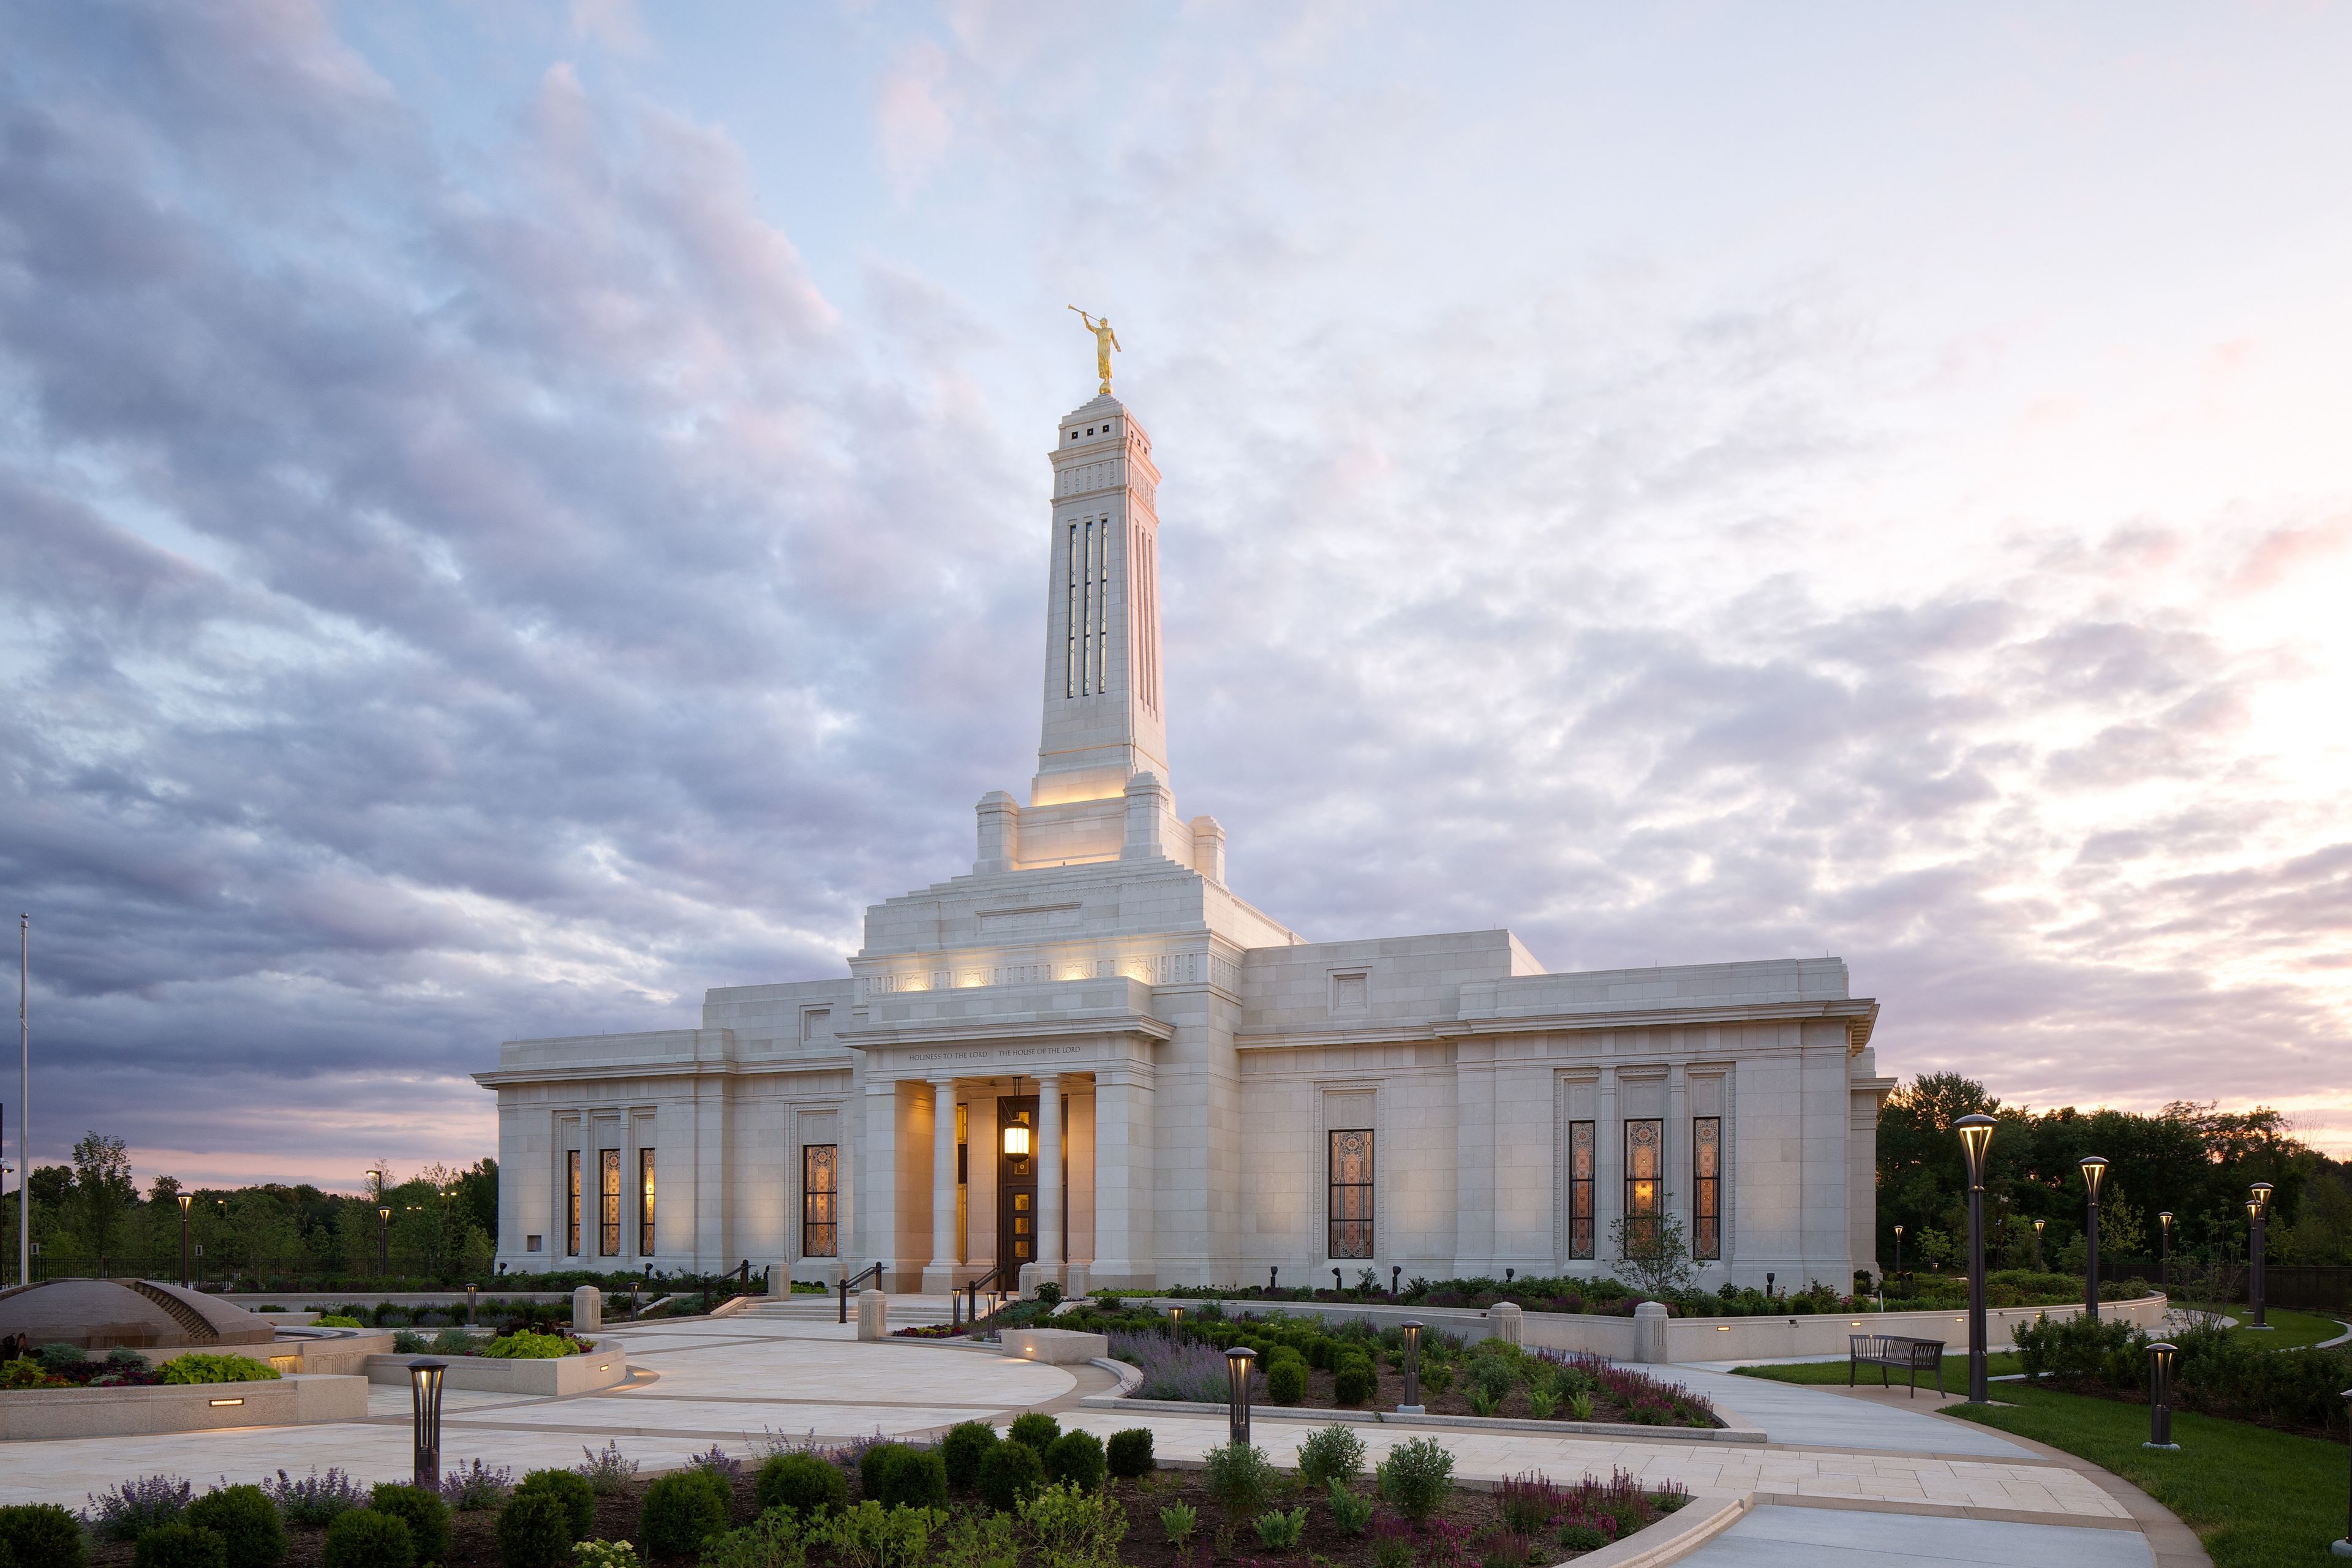 A sunset behind the Indianapolis Indiana Temple.